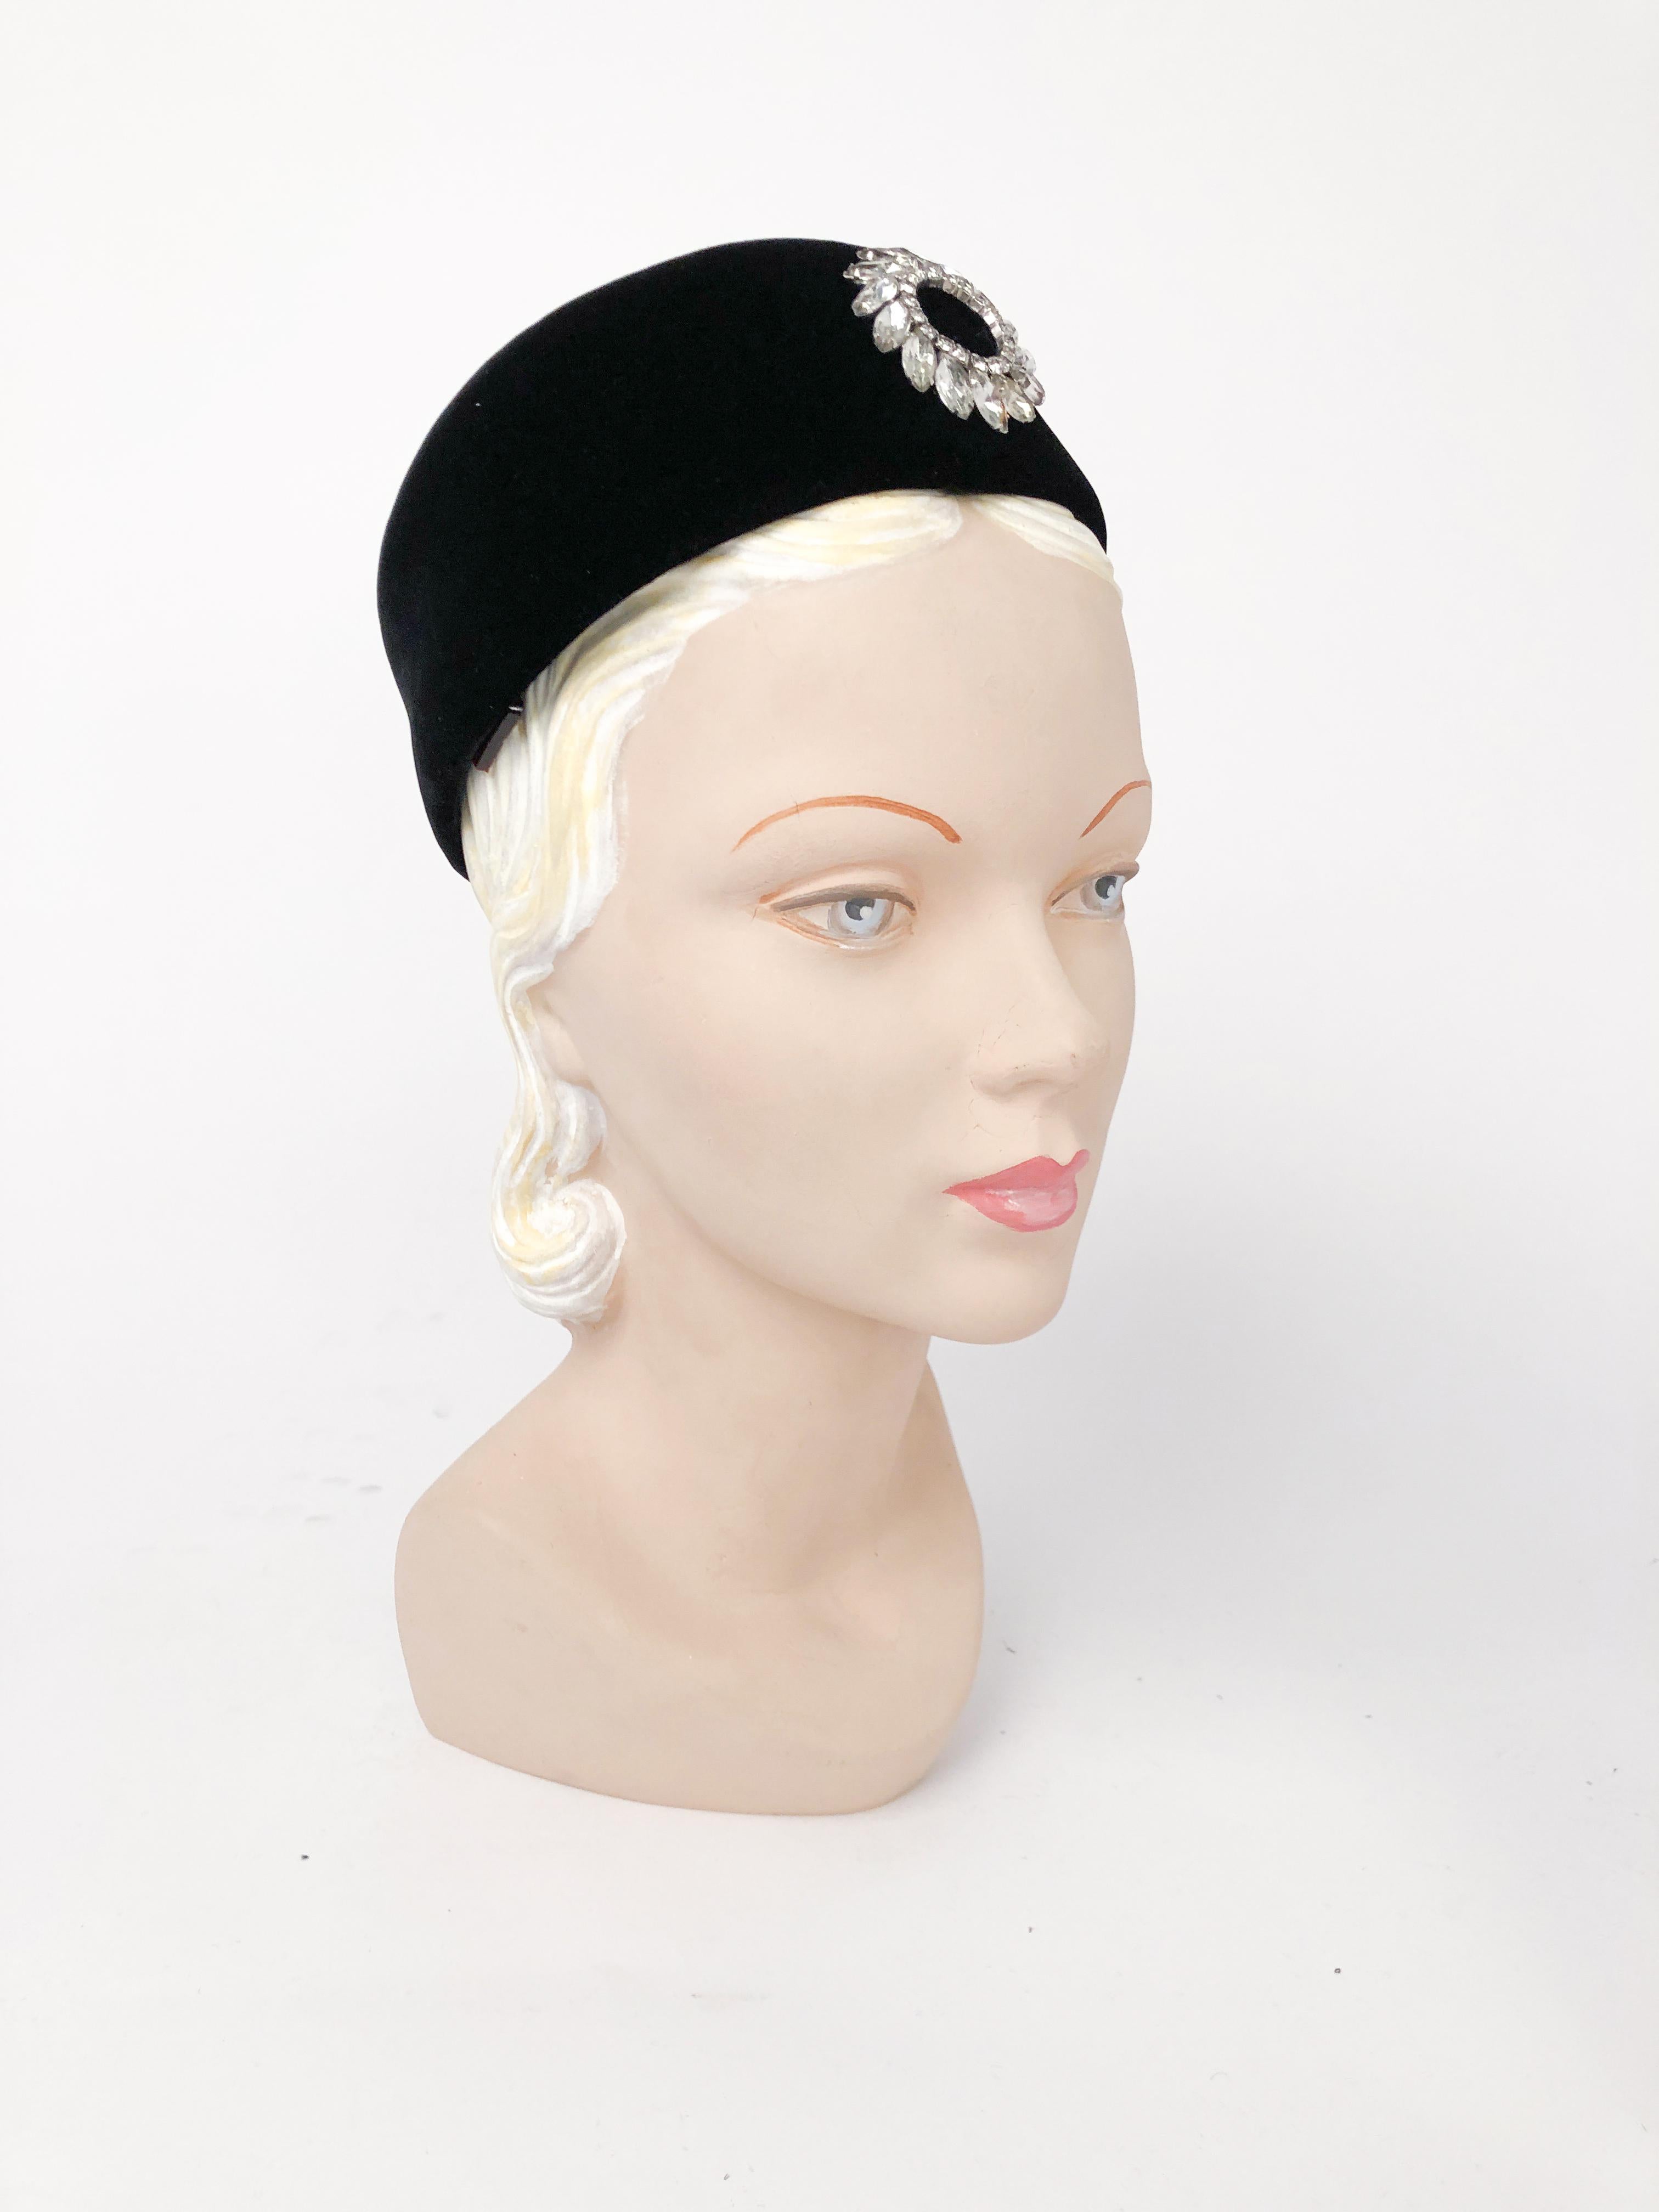 1960s Black Velvet Pillbox Hat with Rhinestone wreath shaped accent. The inside of the hat has hair combs to further secure the hat to the head.